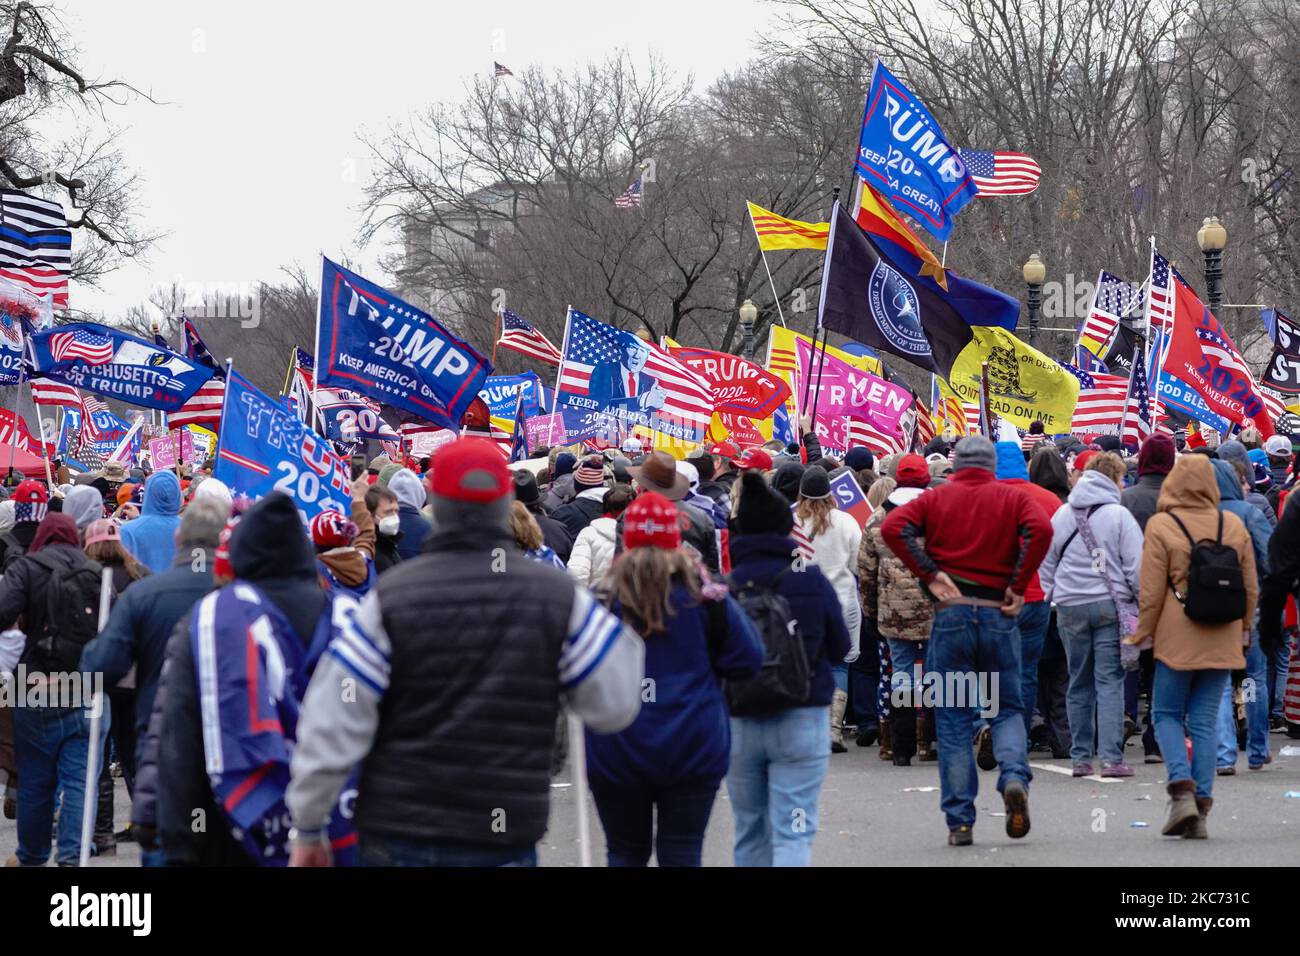 Thousands of supporters of US President Donald Trump march through the streets of the city as they make their way to the Capitol Building in Washington, DC on January 6, 2021. - Donald Trump's supporters stormed a session of Congress held today, January 6, to certify Joe Biden's election win, triggering unprecedented chaos and violence at the heart of American democracy and accusations the president was attempting a coup. (Photo by John Nacion/NurPhoto) Stock Photo